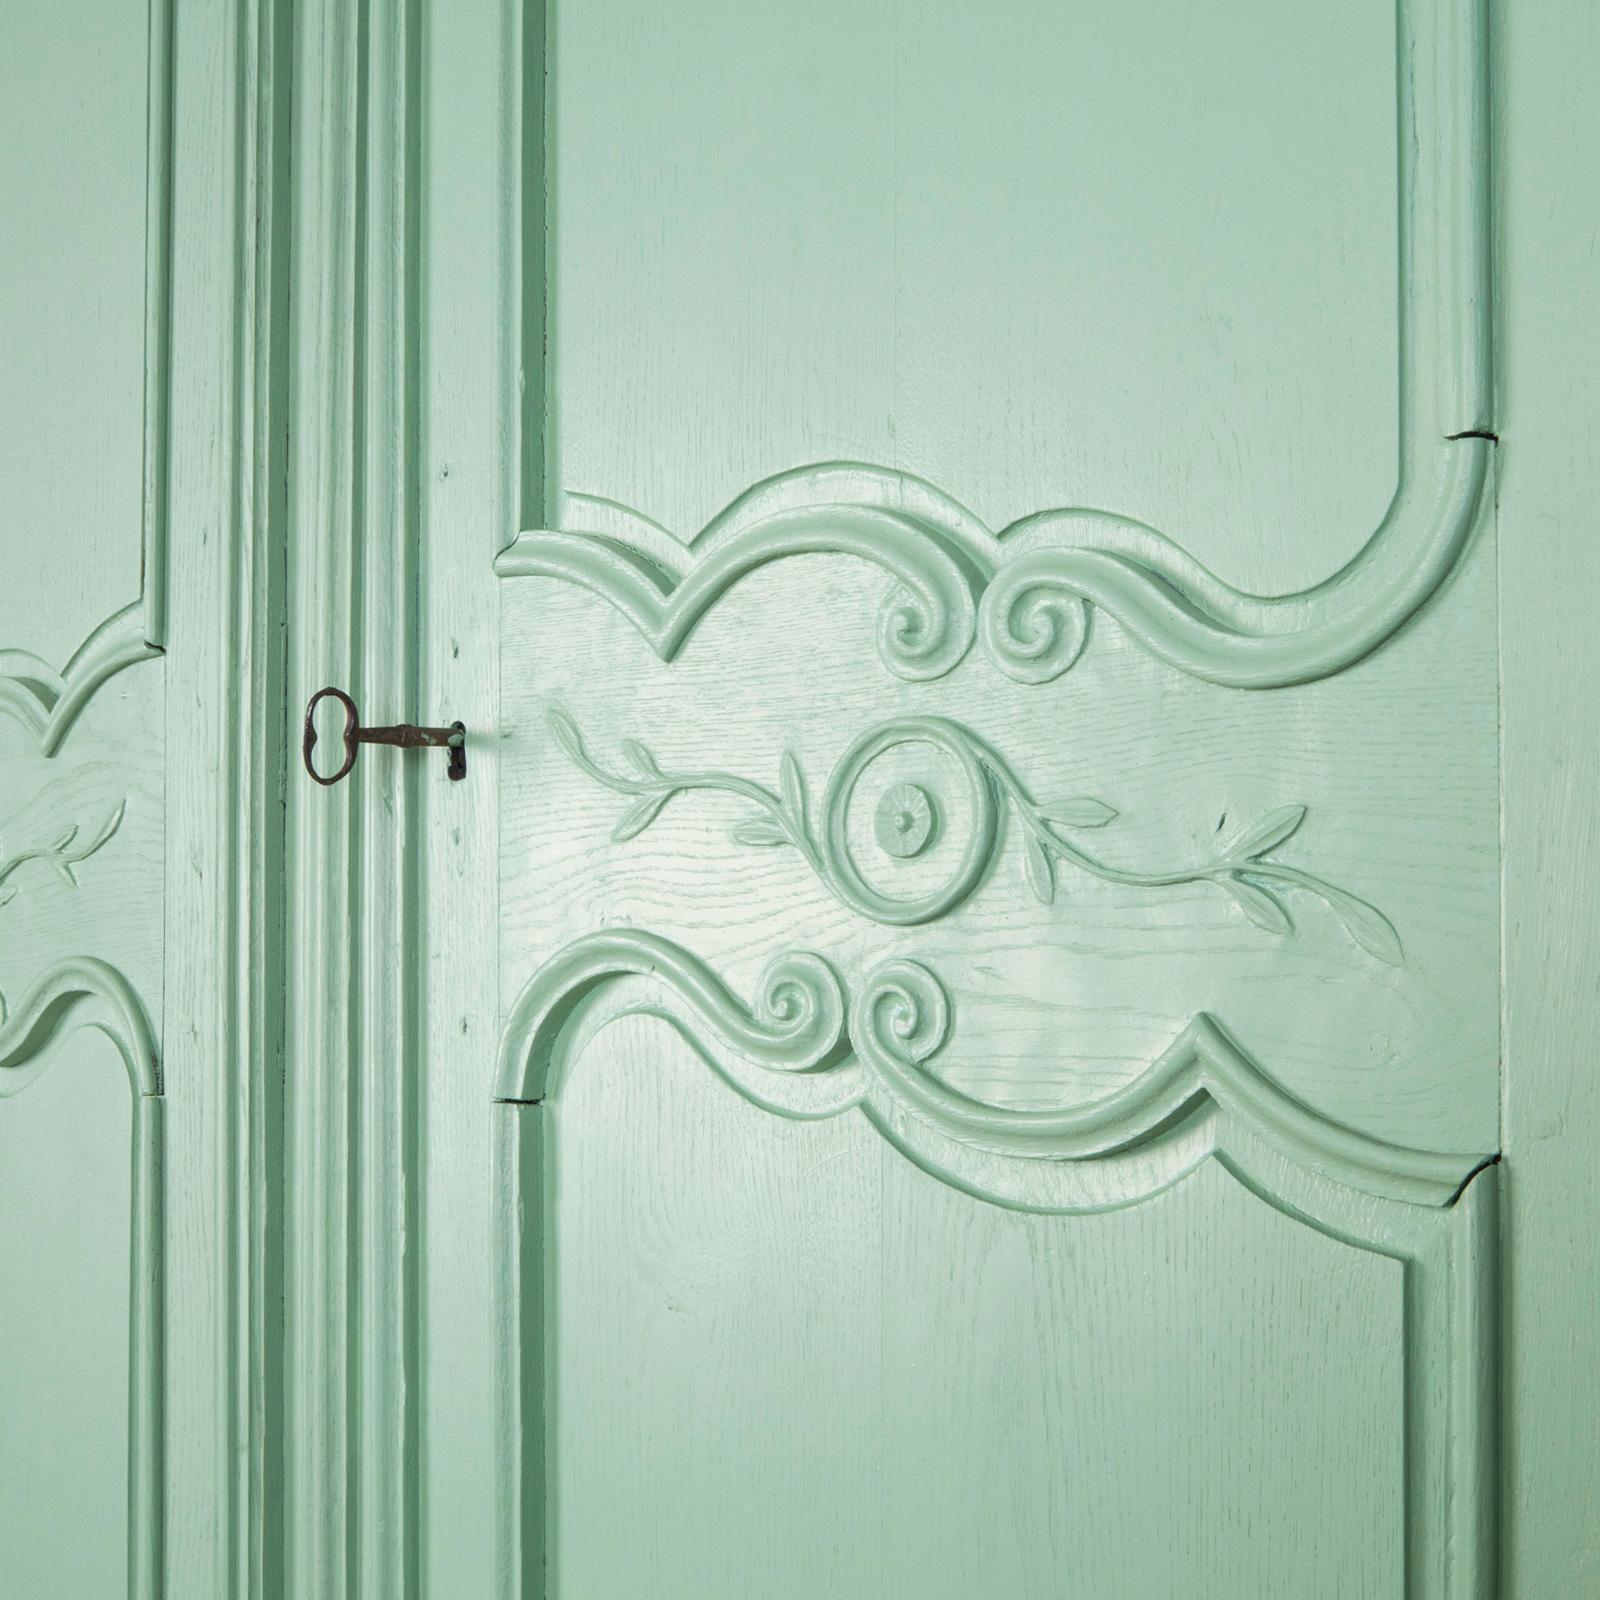 Elegant Soft Green Painted French Marriage Armoire from the 19th Century.

The 